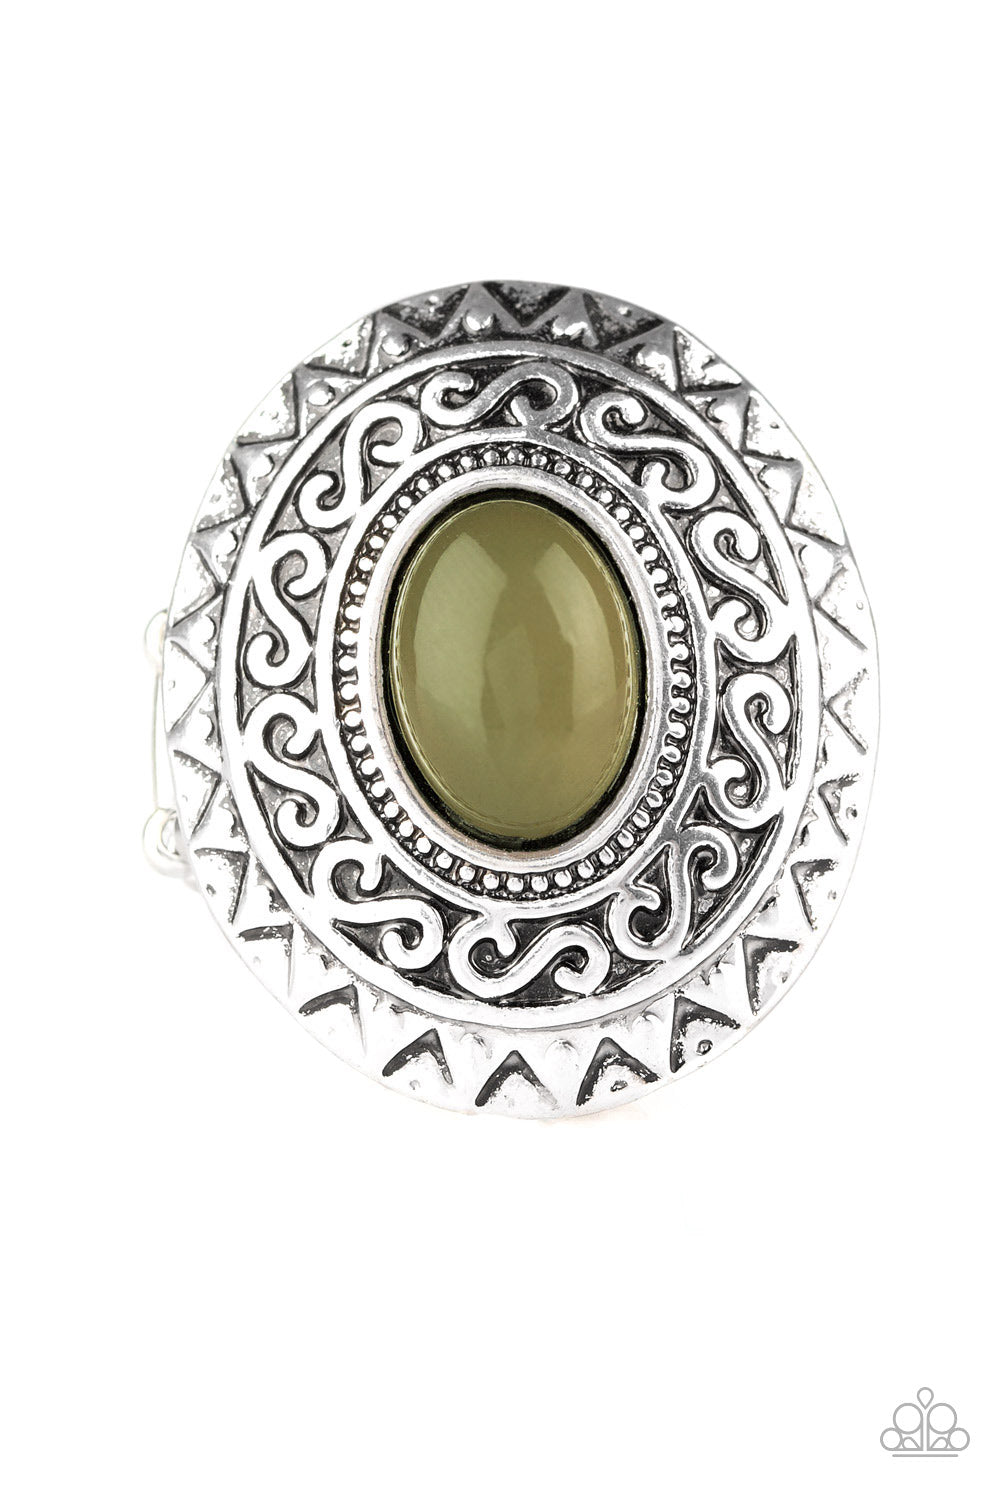 A glowing green stone is pressed in the center of a dramatic silver frame radiating with shimmery sunburst details for a seasonal look. Features a stretchy band for a flexible fit.